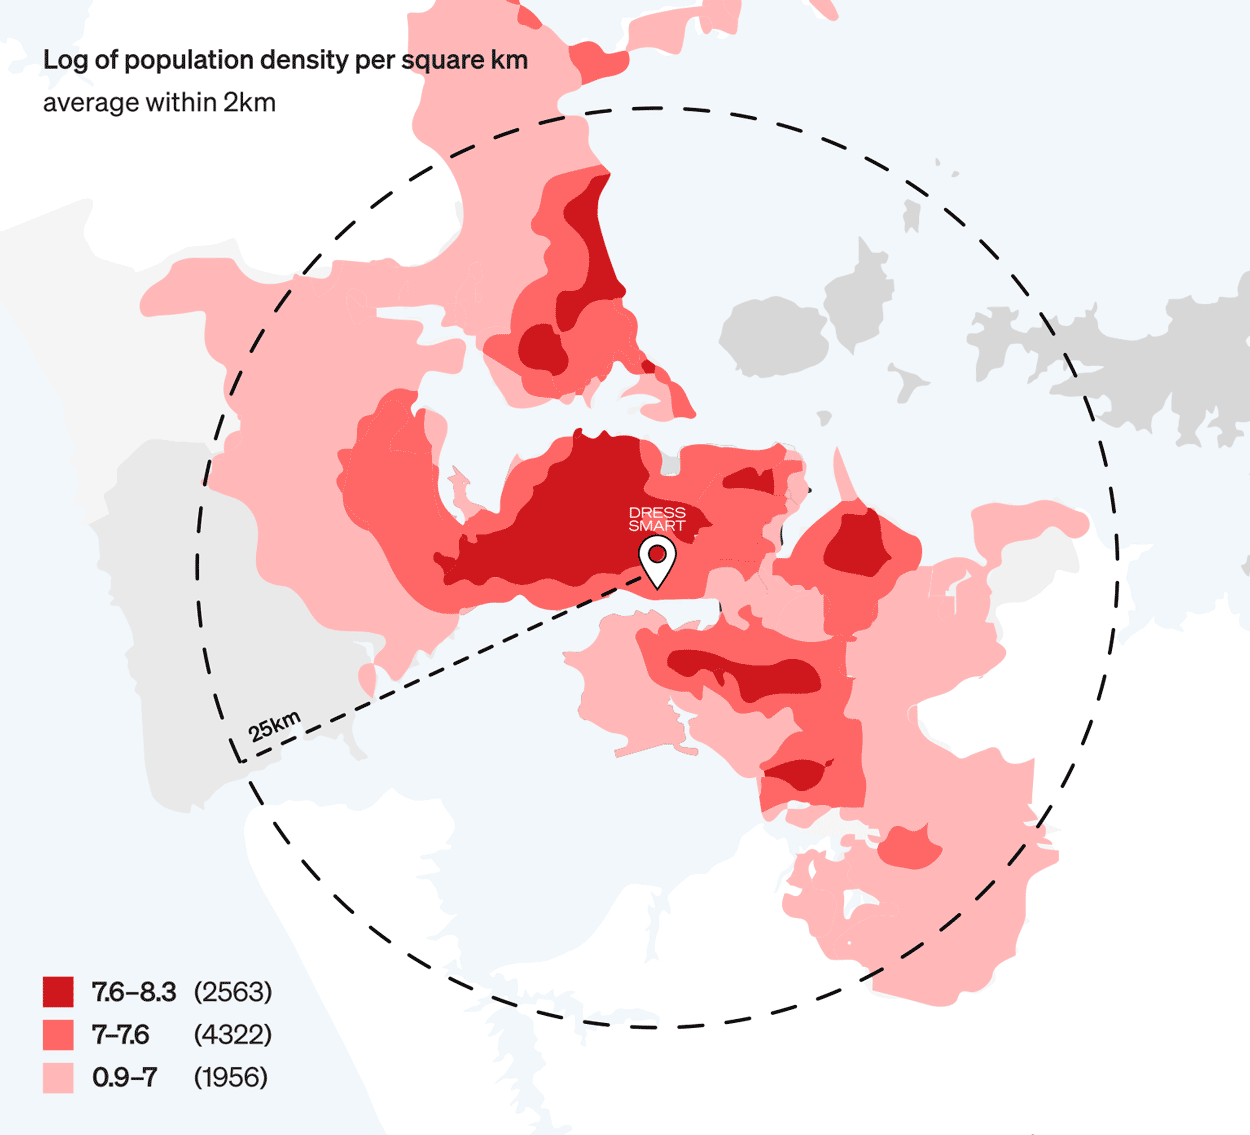 Map showing the trade area of Dress Smart Auckland, with population density information overlaid on top.